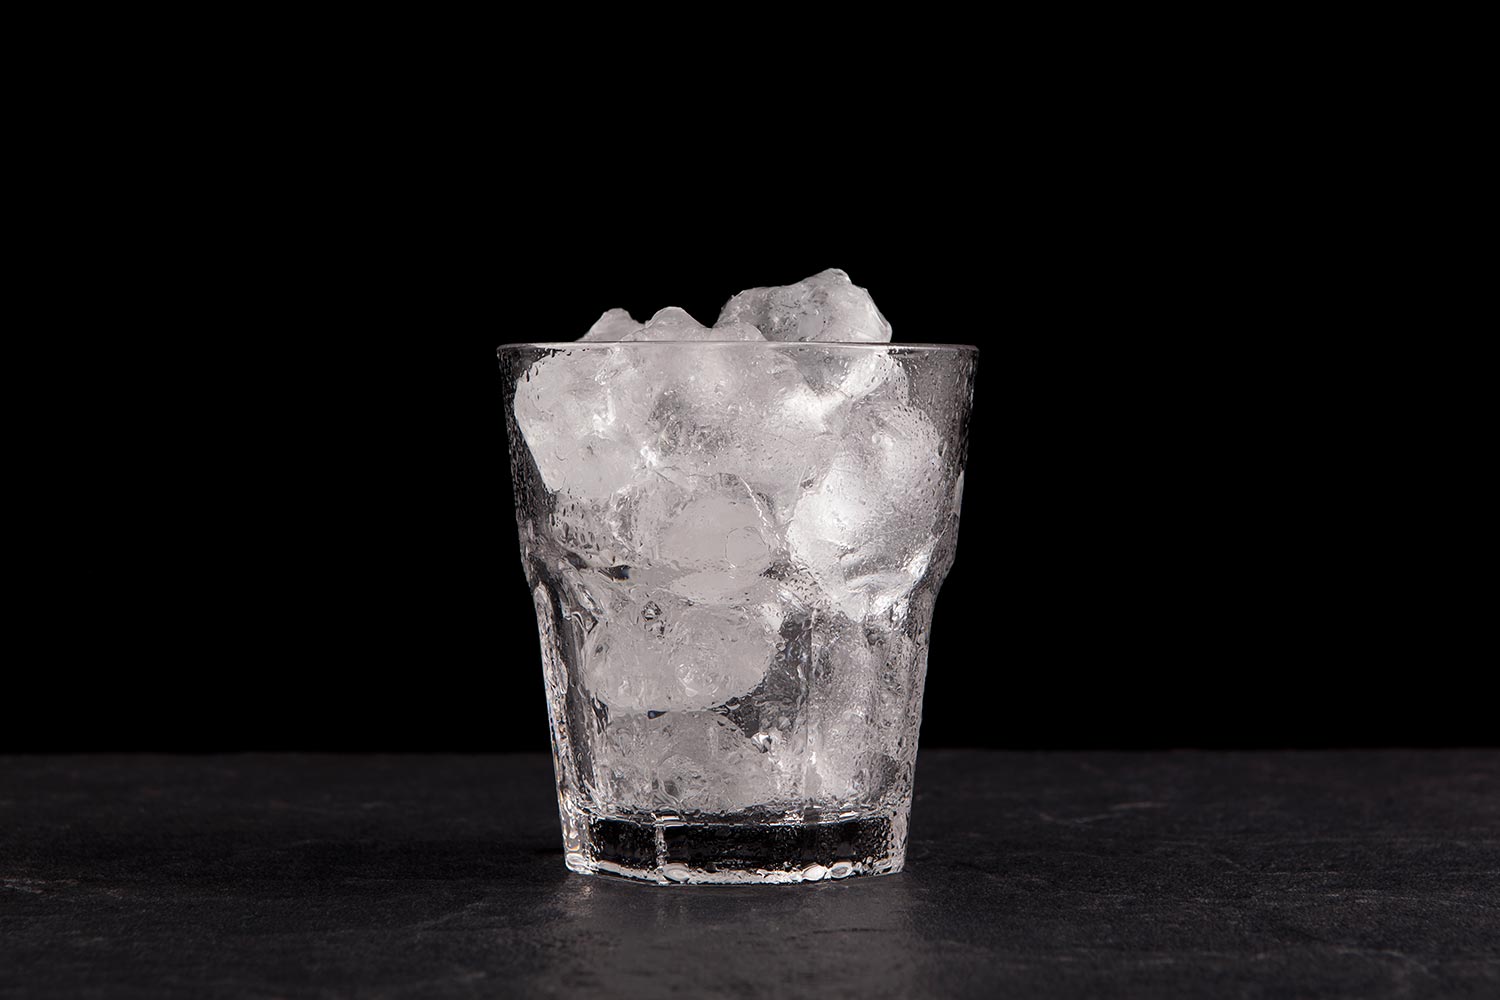 Ice cubes in a transparent glass